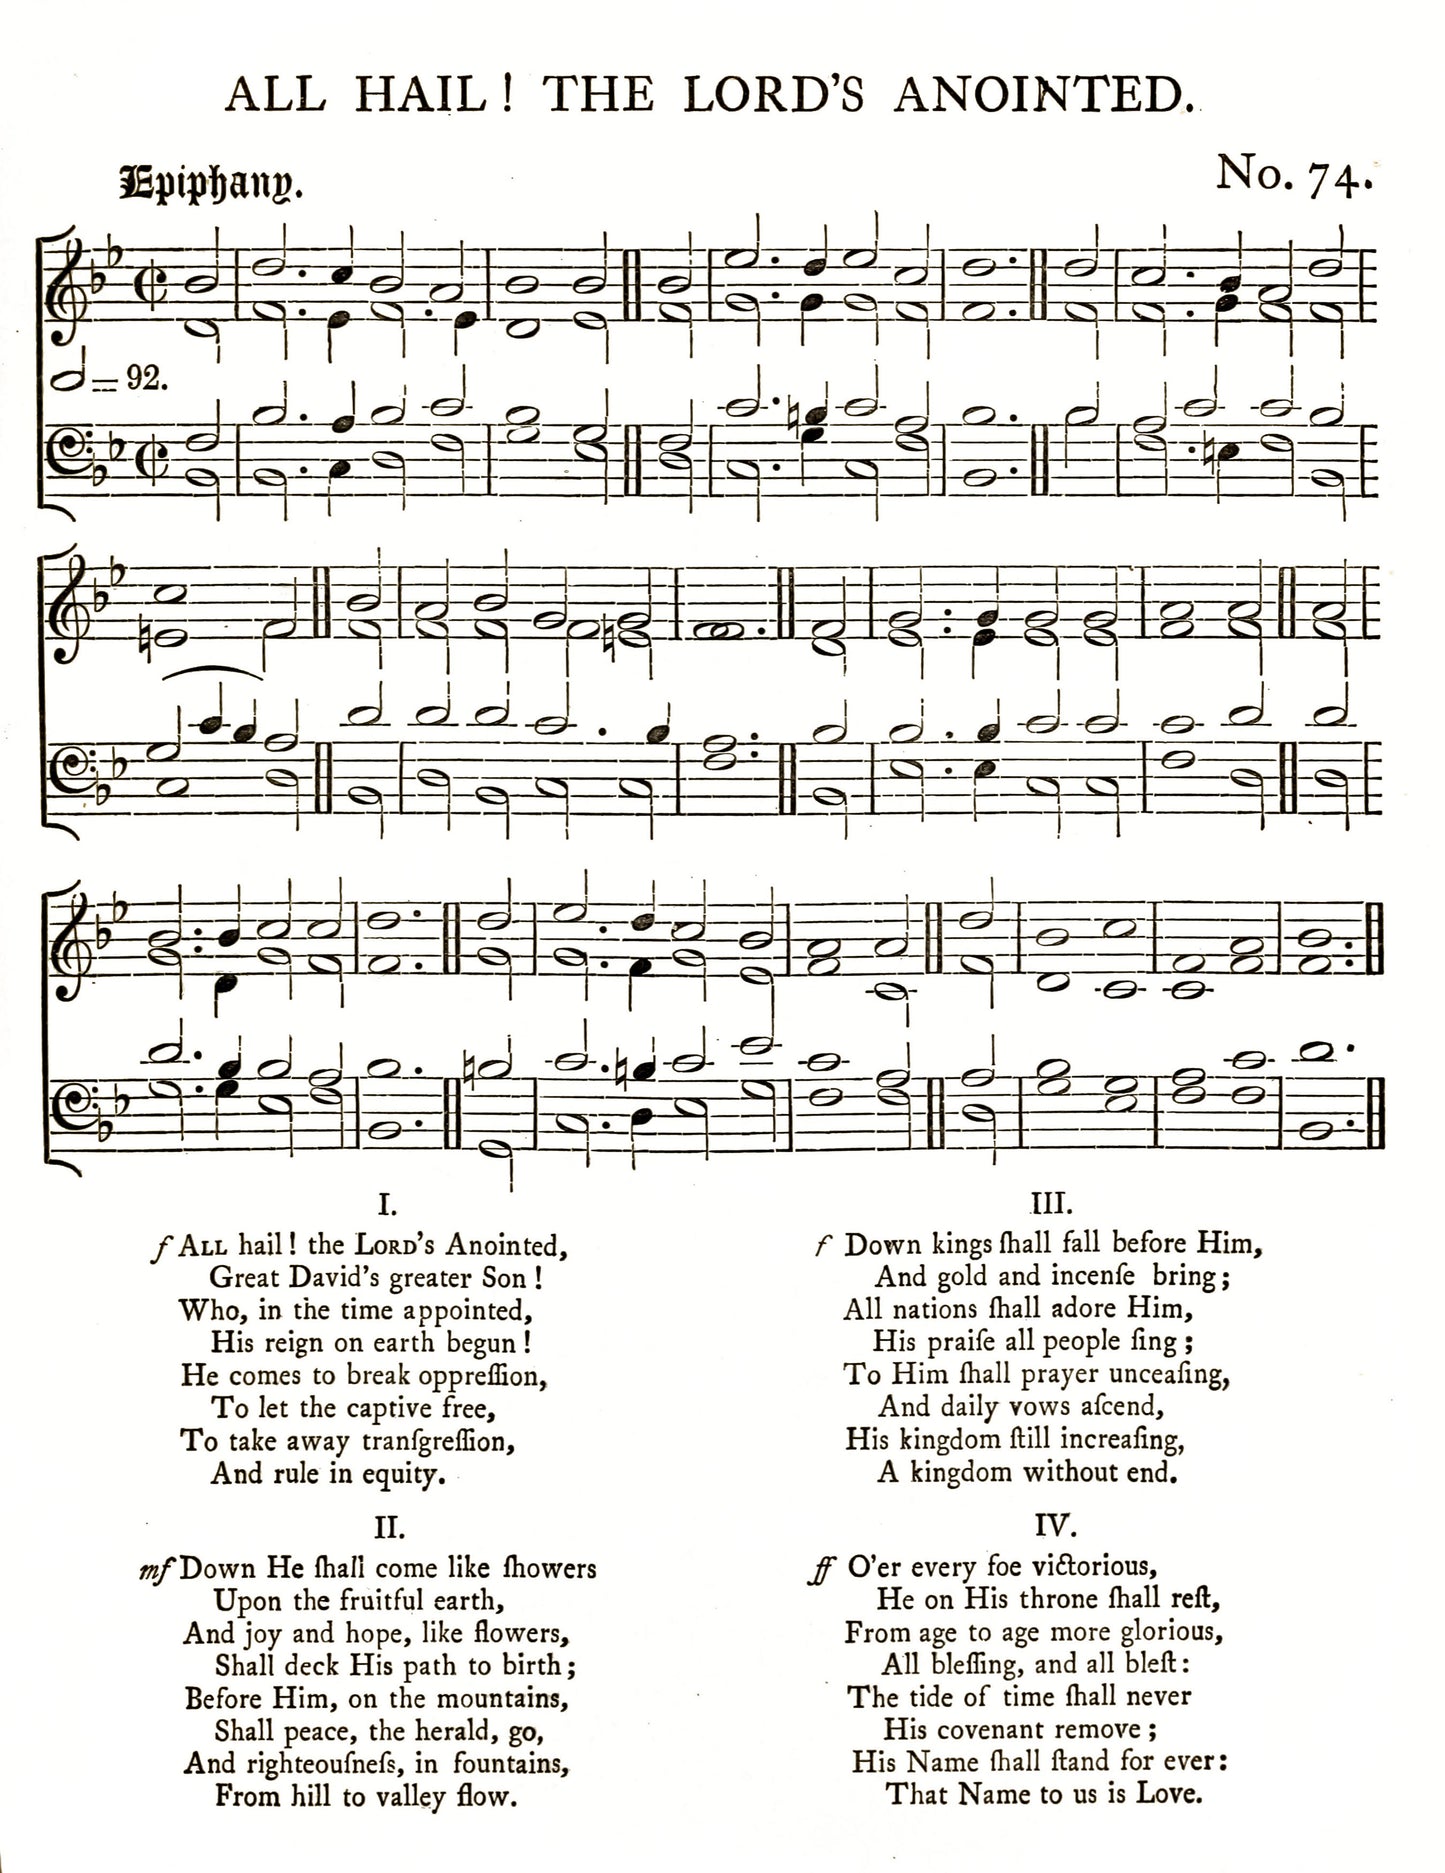 The Anglican Hymn Book Set 2 [68 Images]